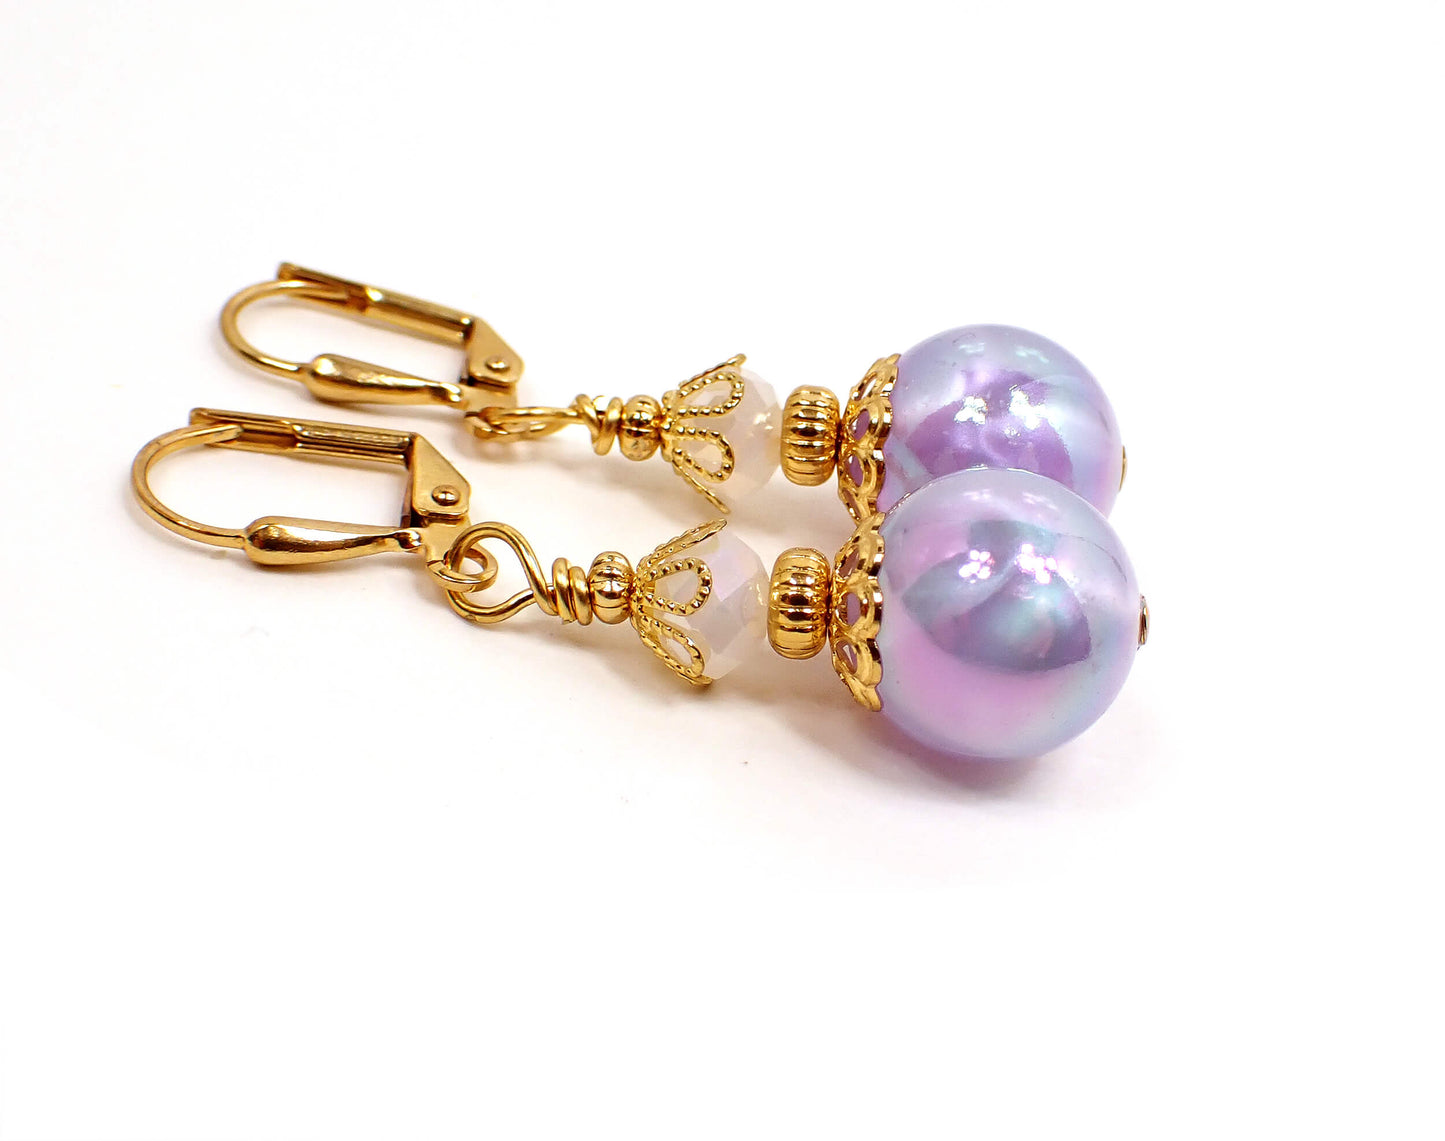 Handmade Iridescent Purple Drop Earrings Gold Plated Hook Lever Back or Clip On